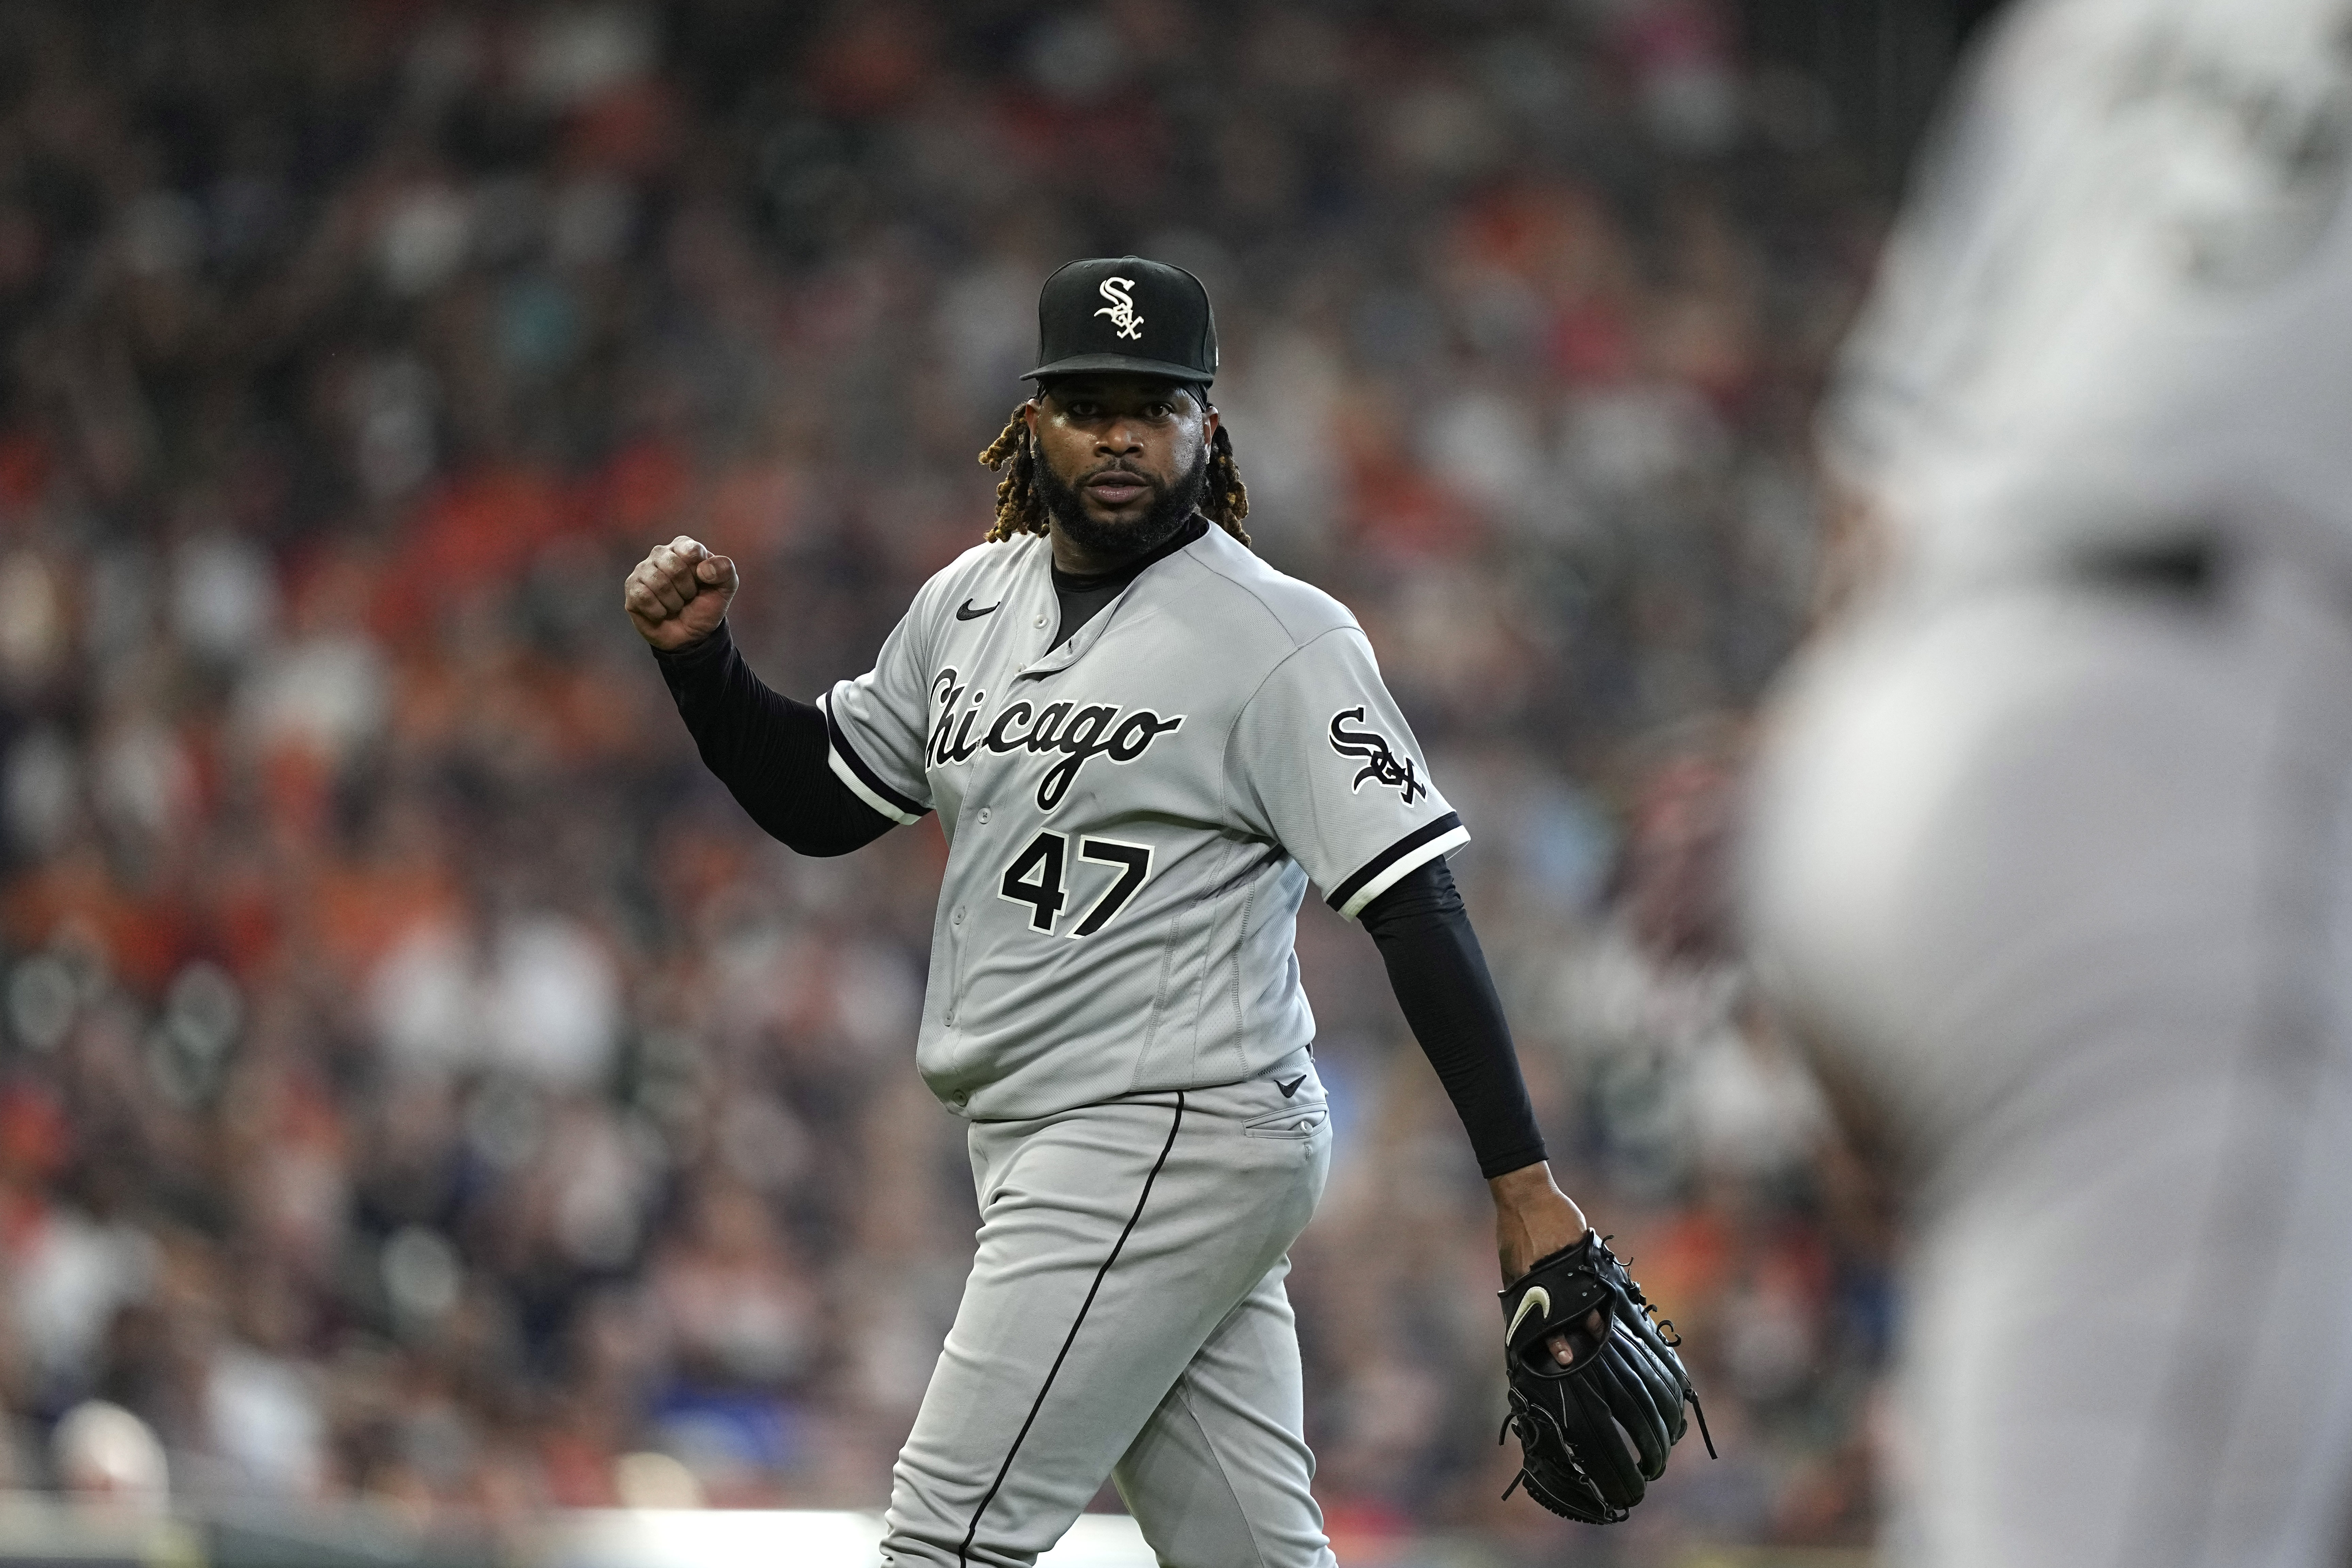 Johnny Cueto: From 'short and skinny' to All-Star